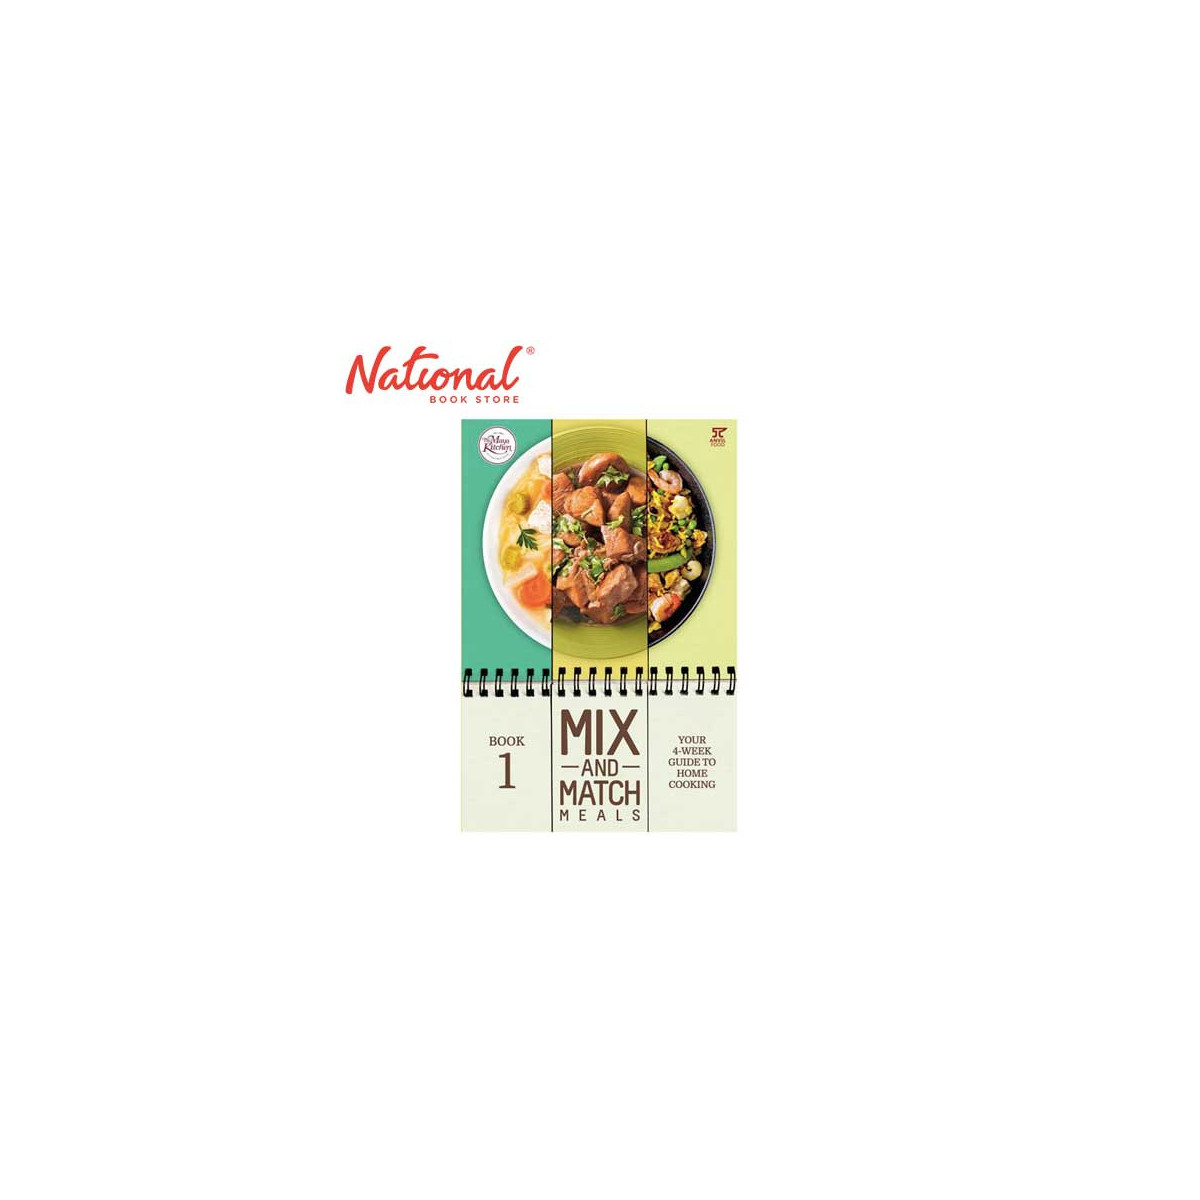 Mix and Match Meals by The Maya Kitchen - Trade Paperback - Cookbooks